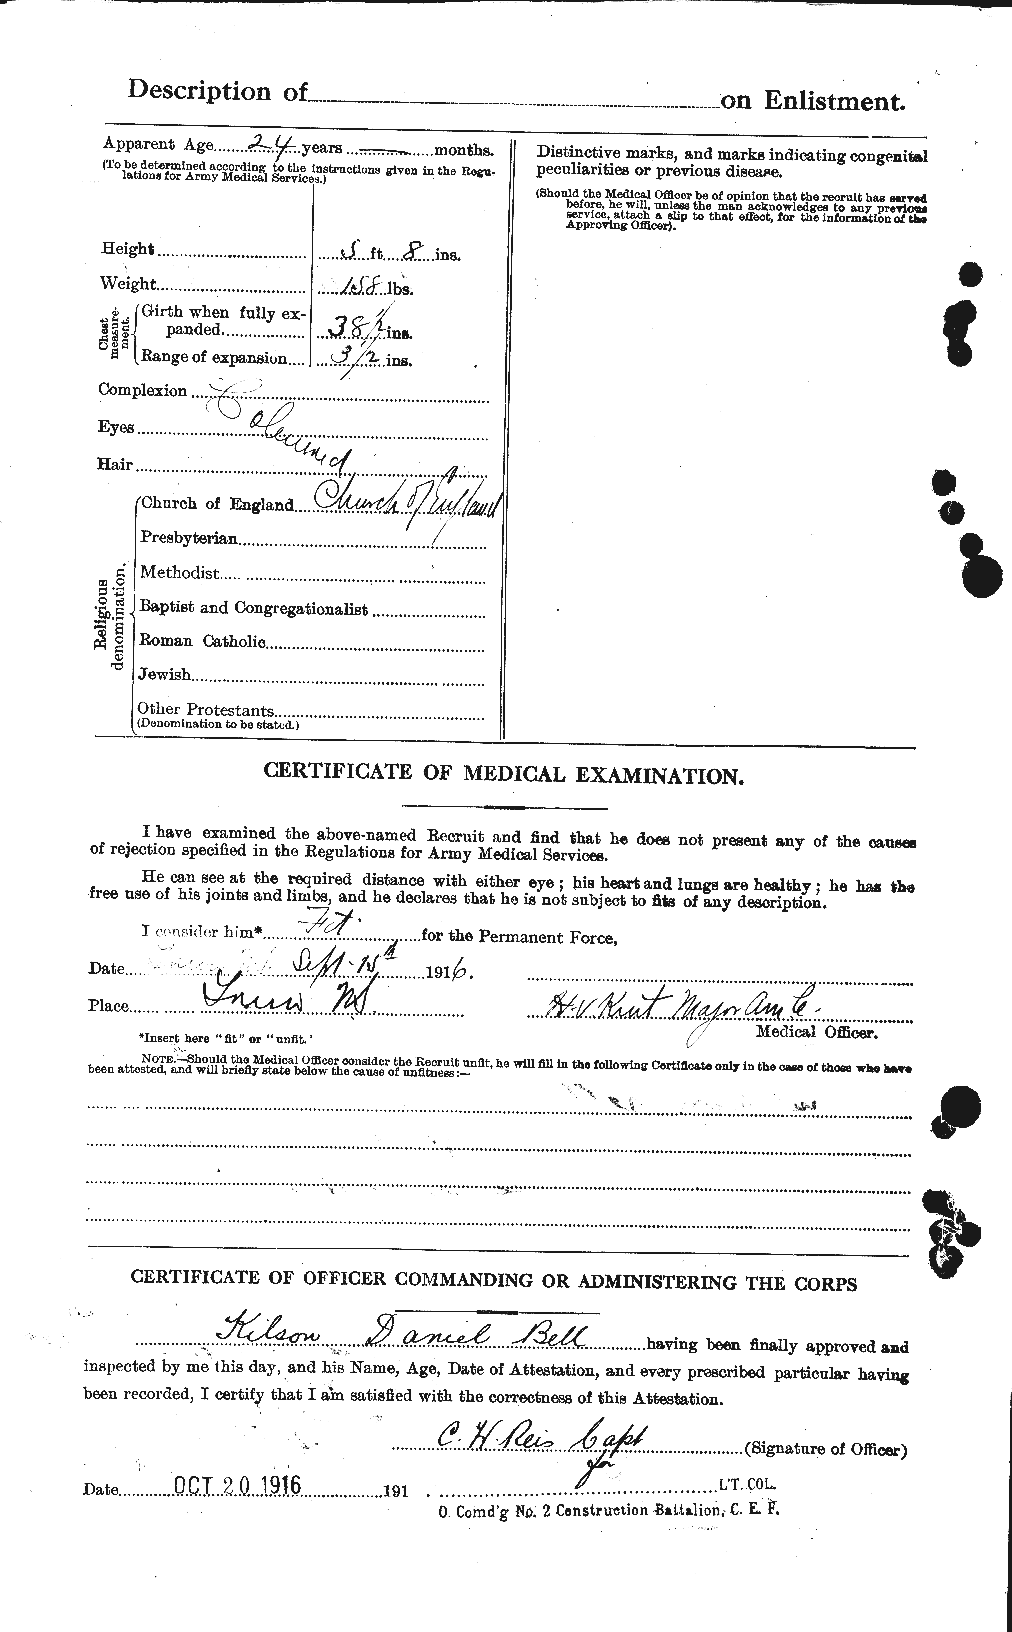 Personnel Records of the First World War - CEF 234502b